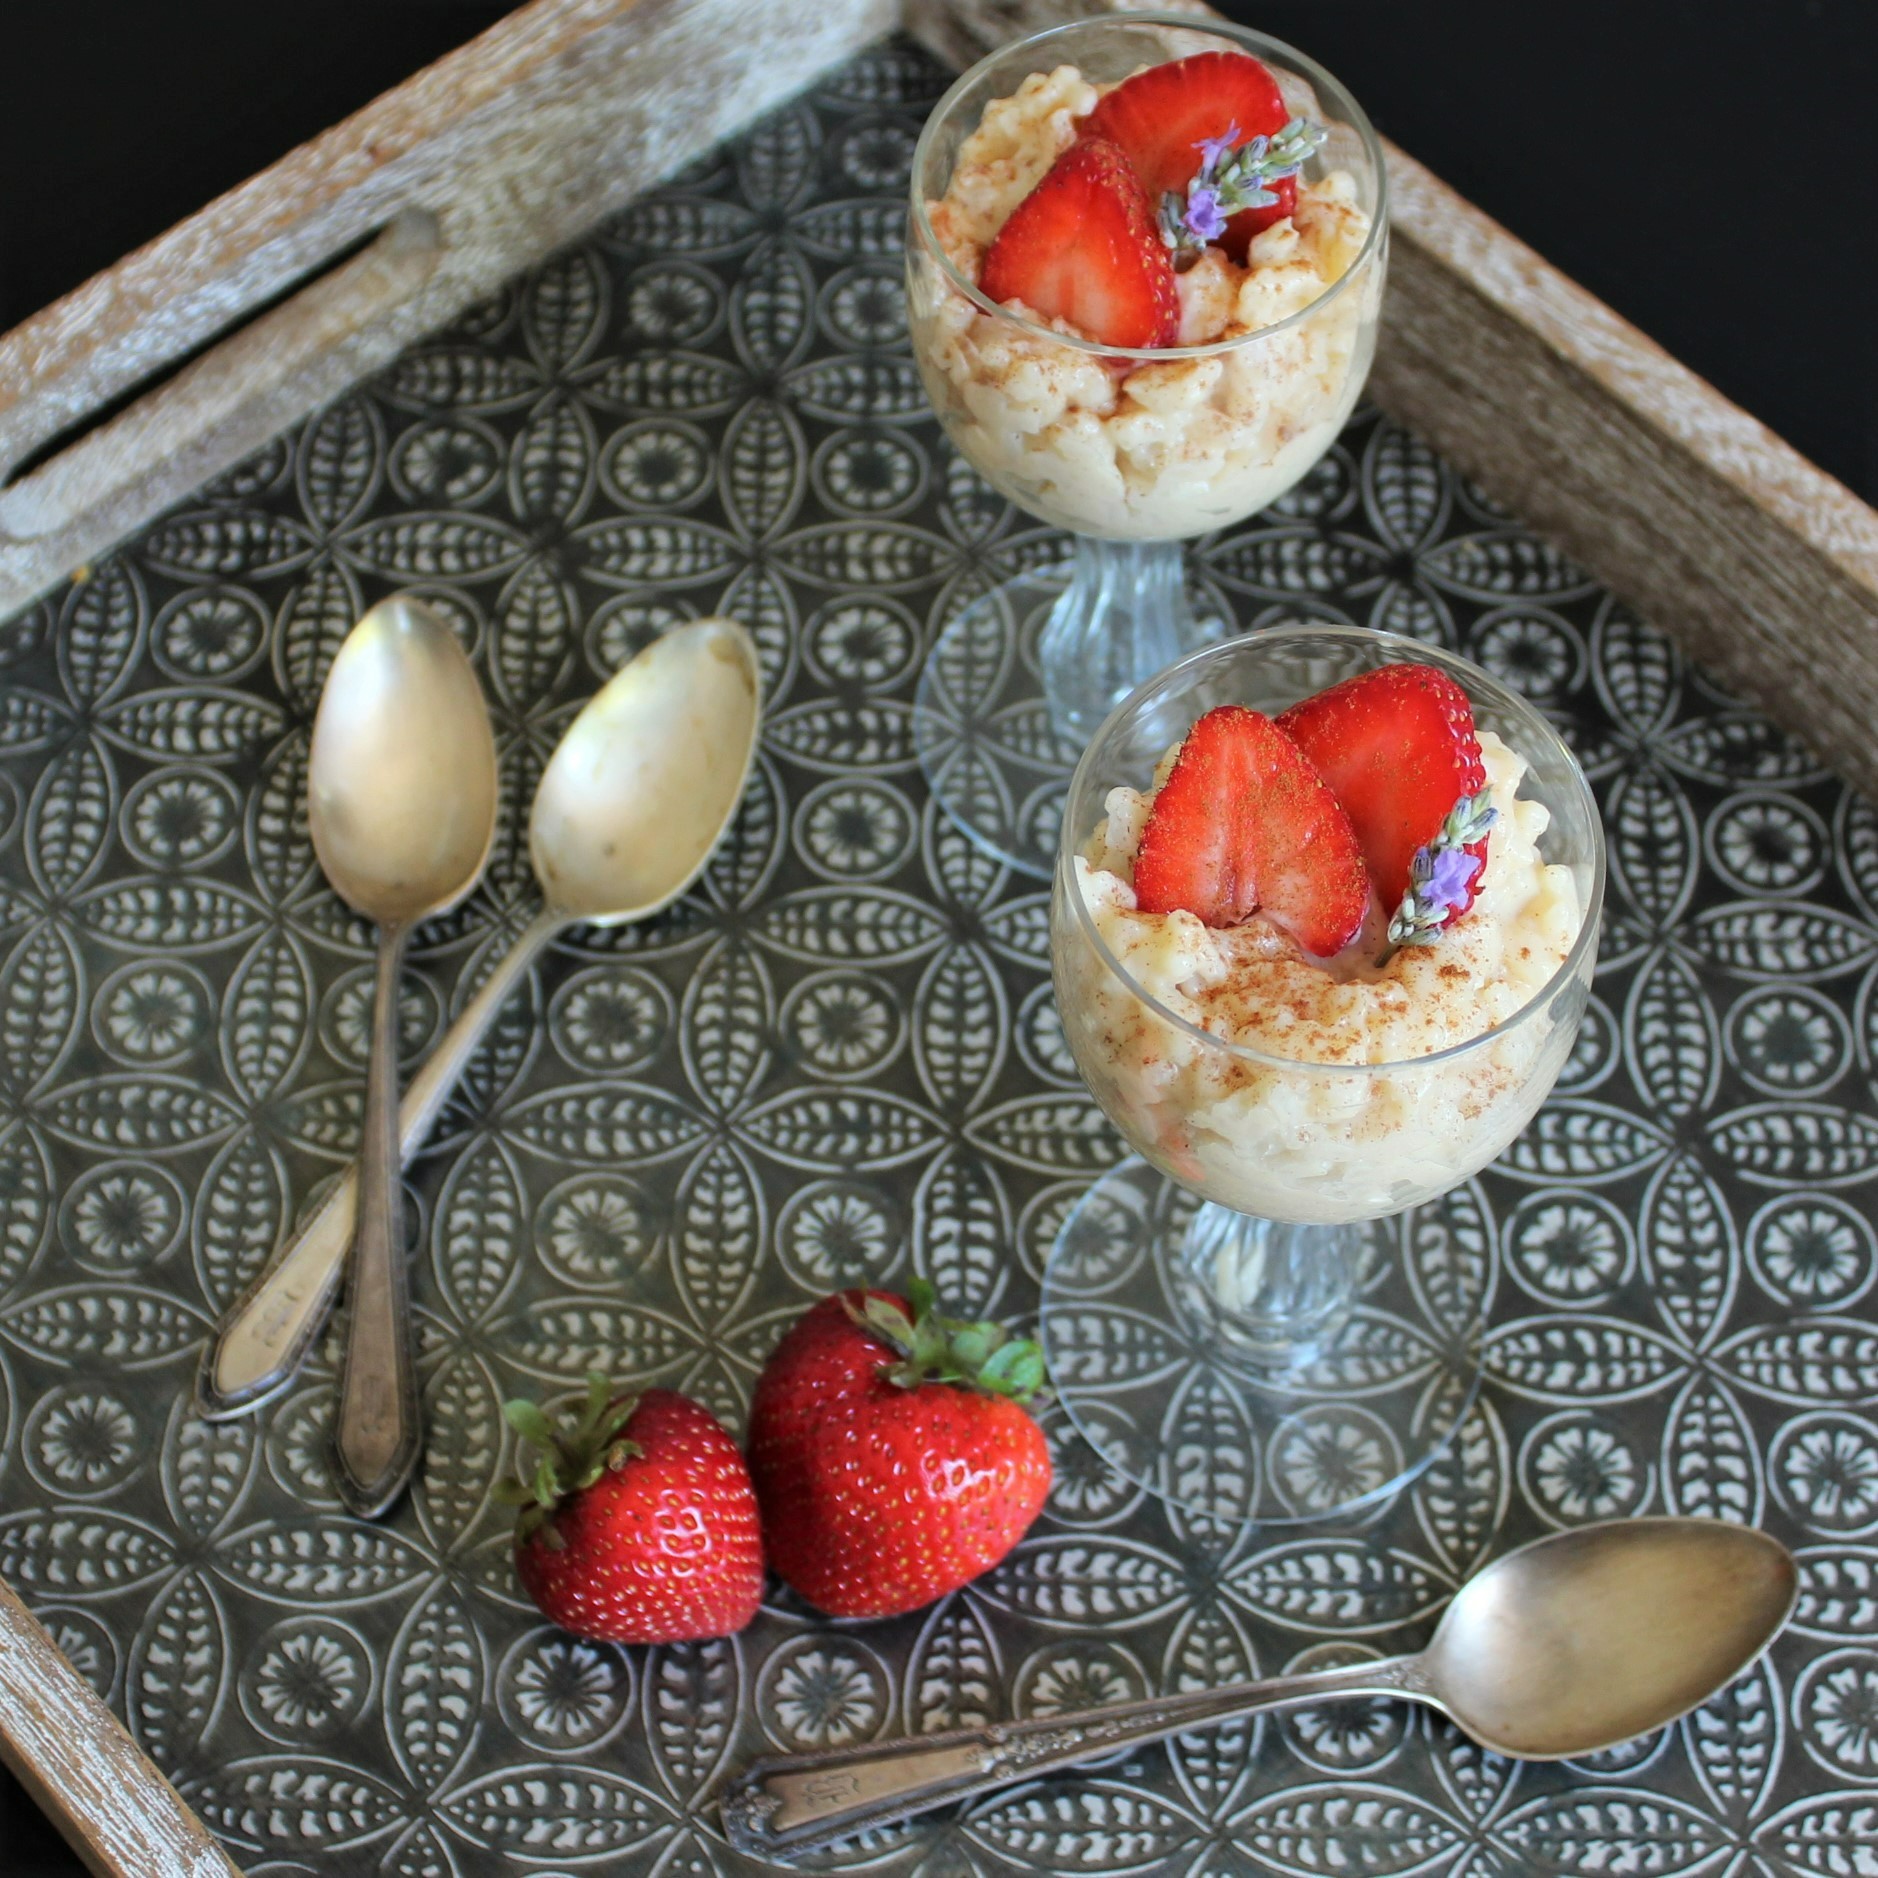 Two antique dessert glasses of rice pudding with strawberries and spoons